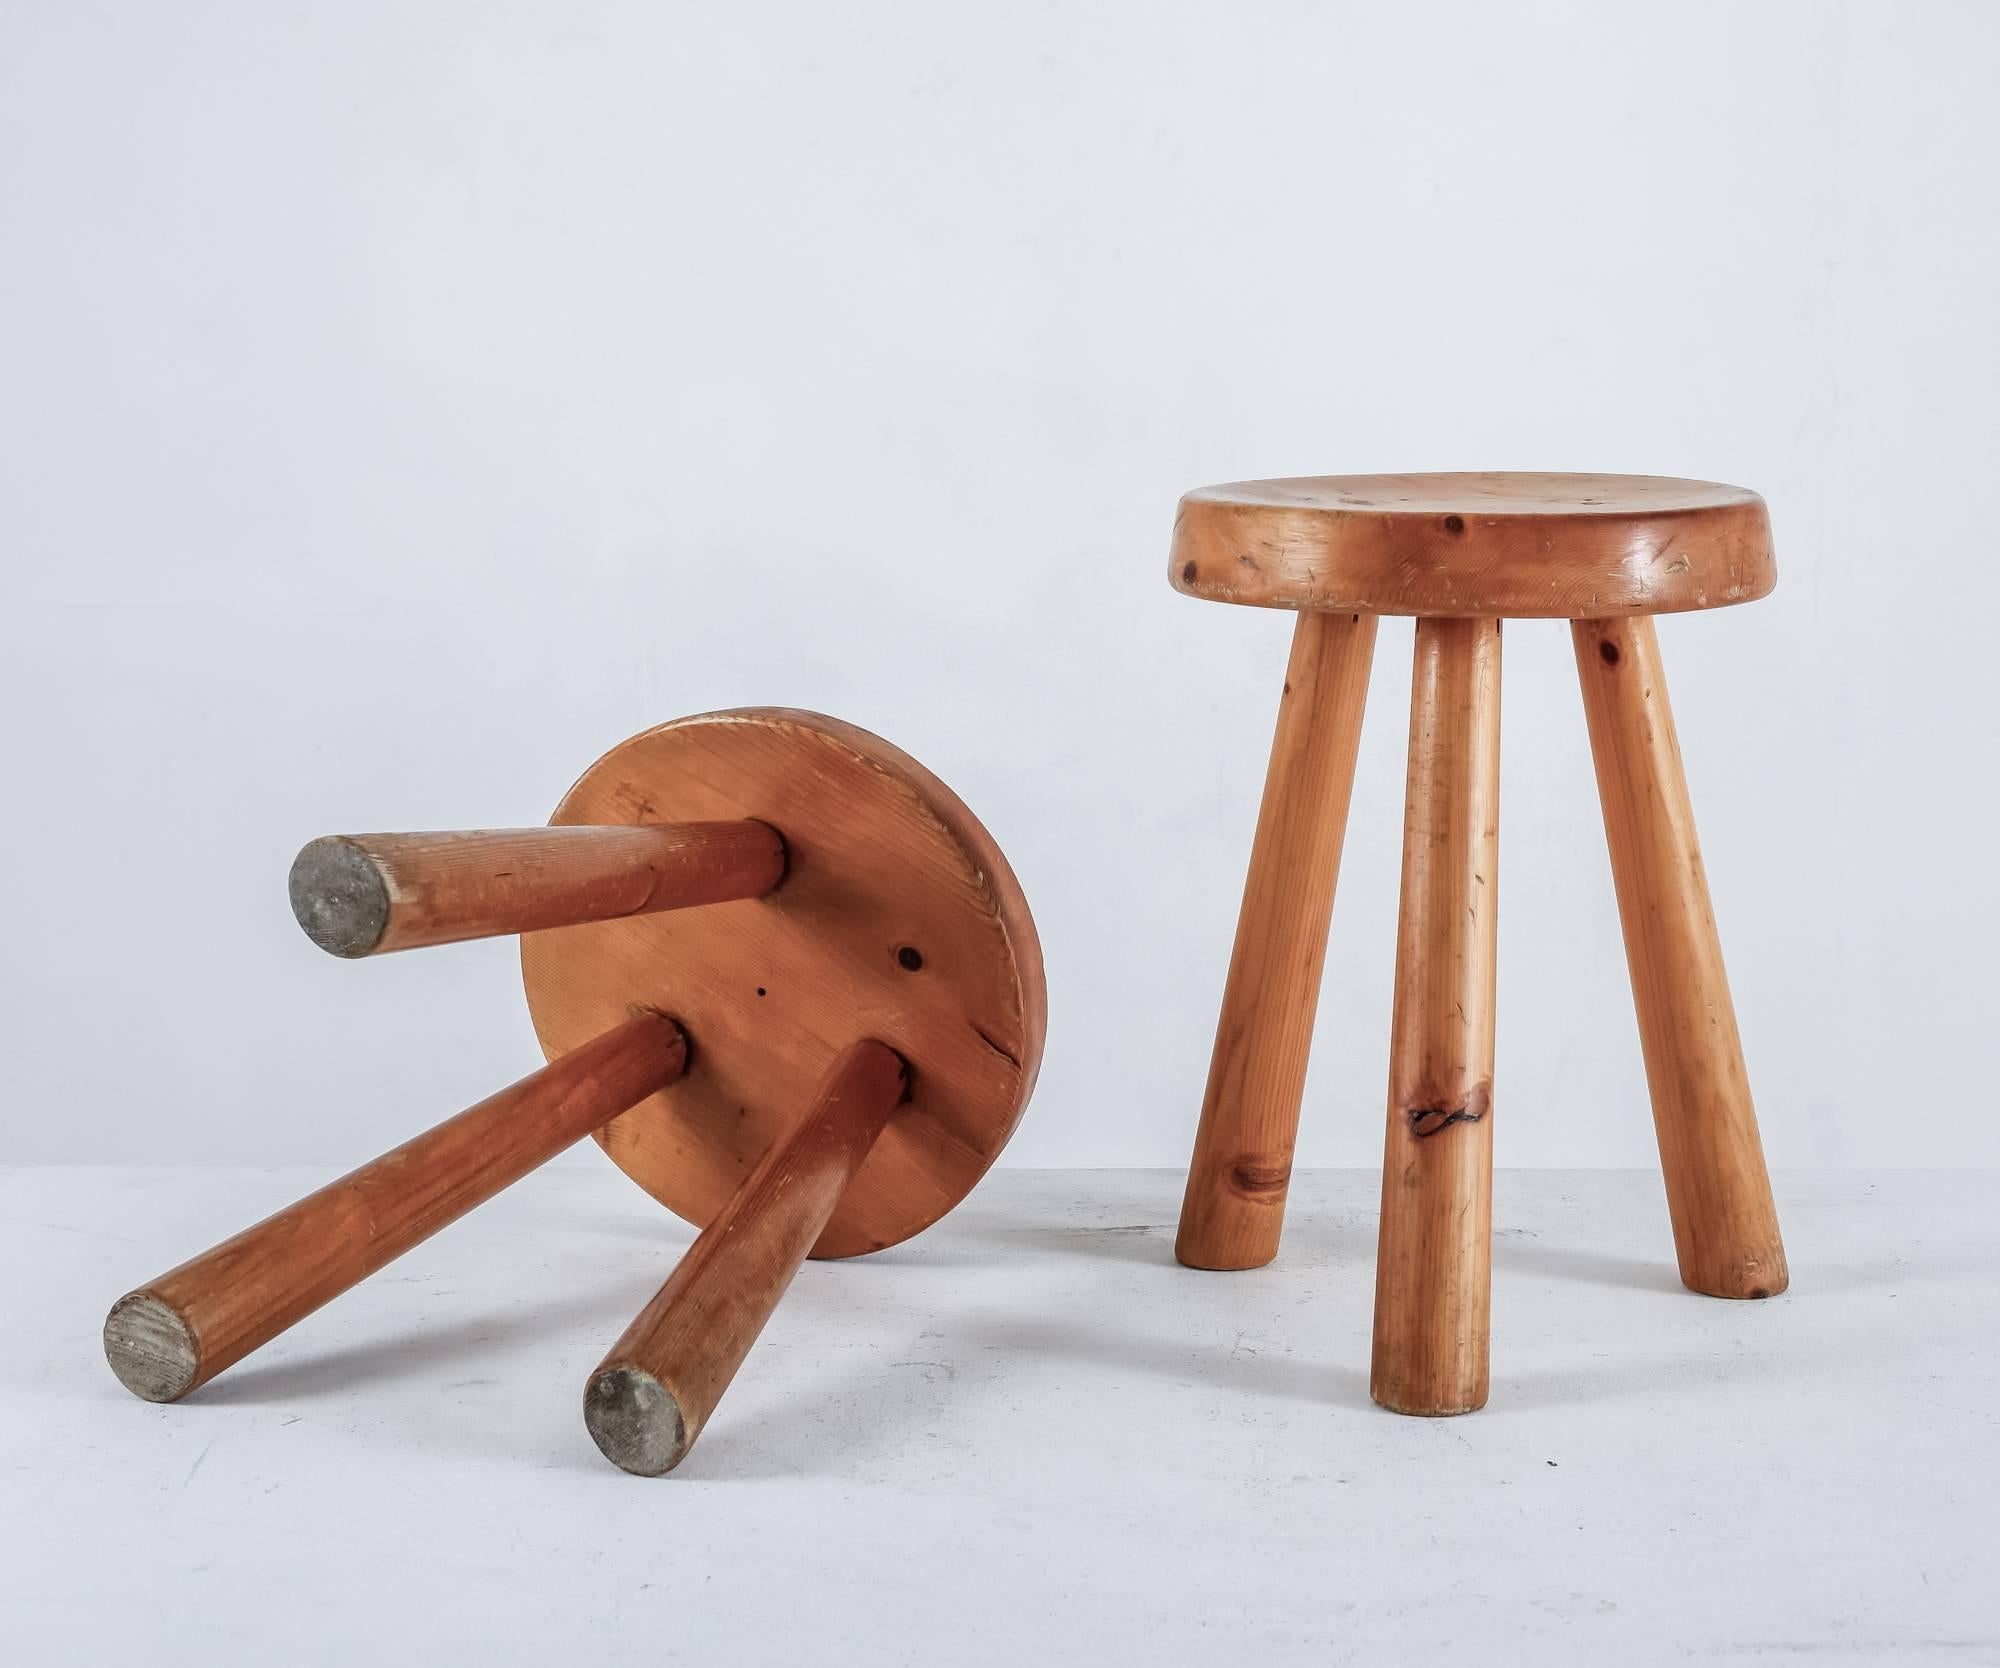 A pair of tripod pine Charlotte Perriand stools with a round seating with a diameter of 31.5 cm (12.5